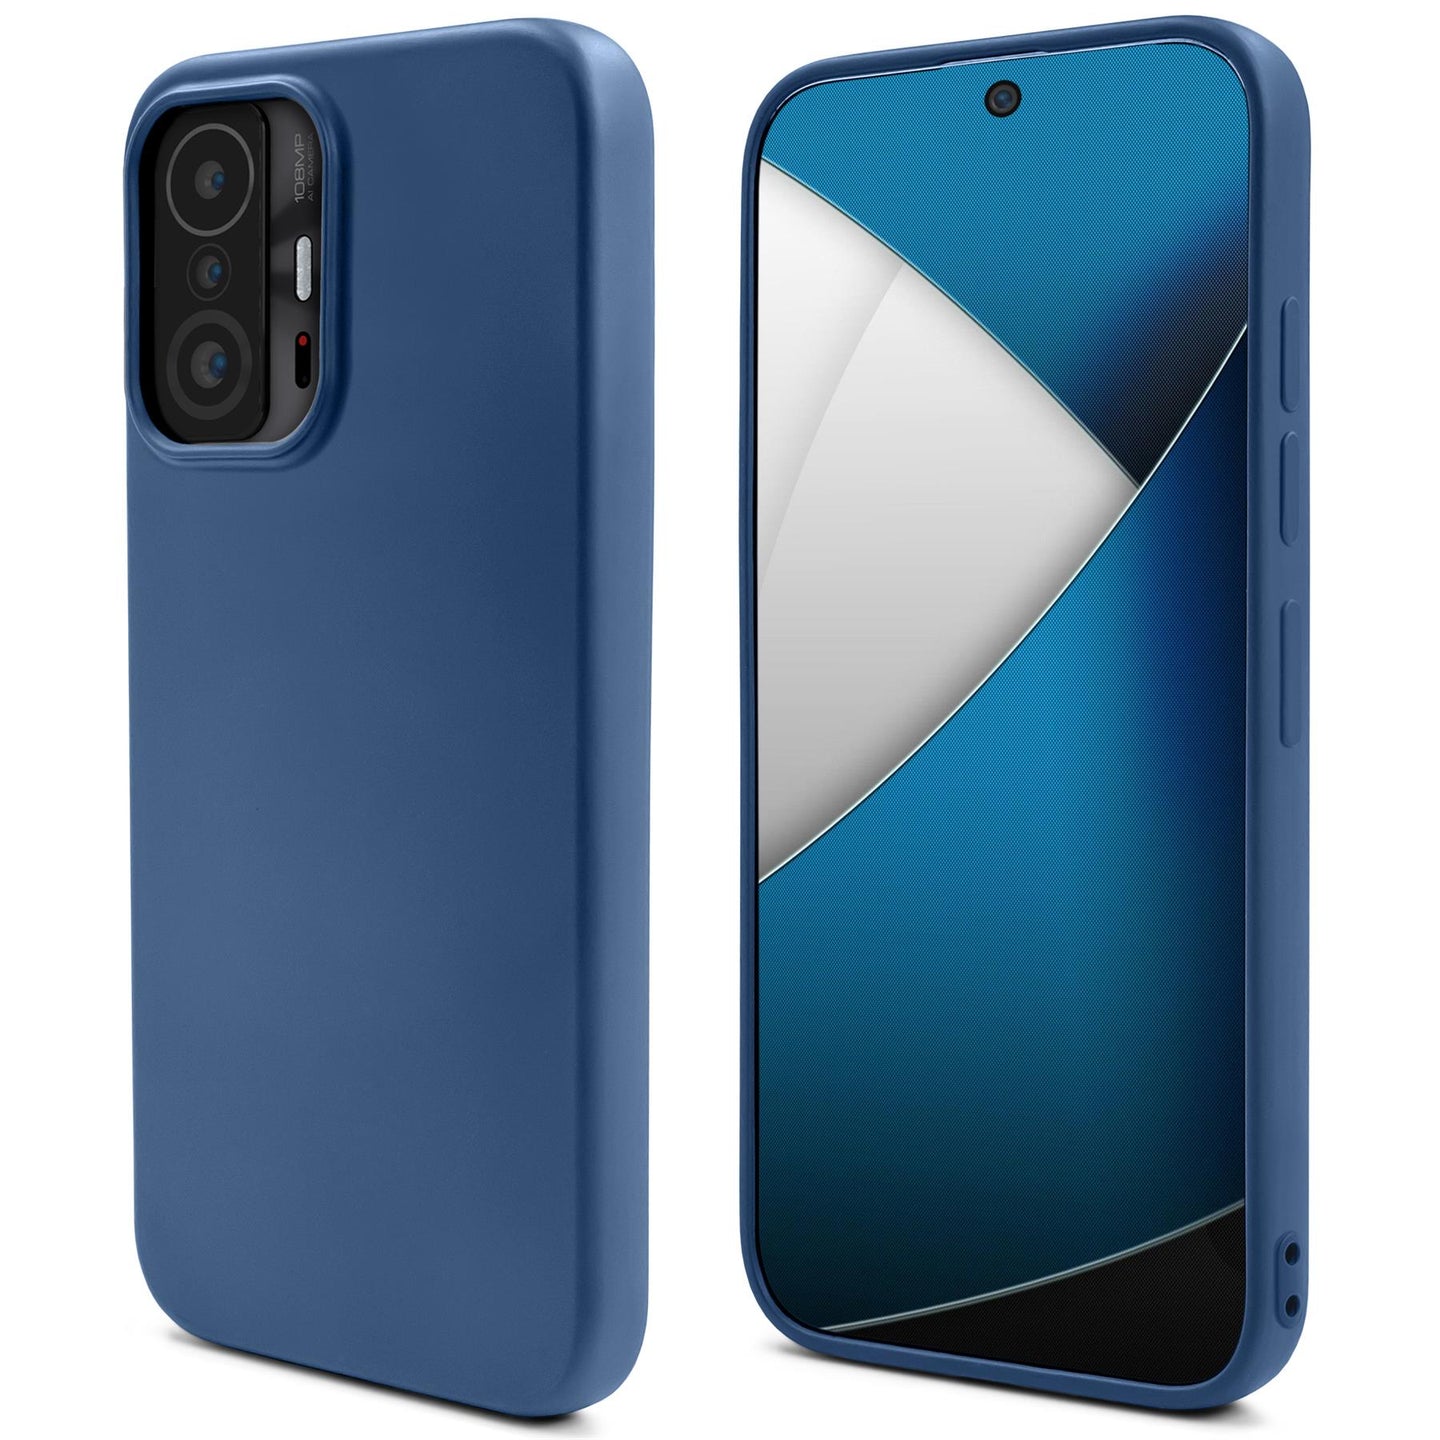 Moozy Lifestyle. Silicone Case for Xiaomi 11T and 11T Pro, Midnight Blue - Liquid Silicone Lightweight Cover with Matte Finish and Soft Microfiber Lining, Premium Silicone Case